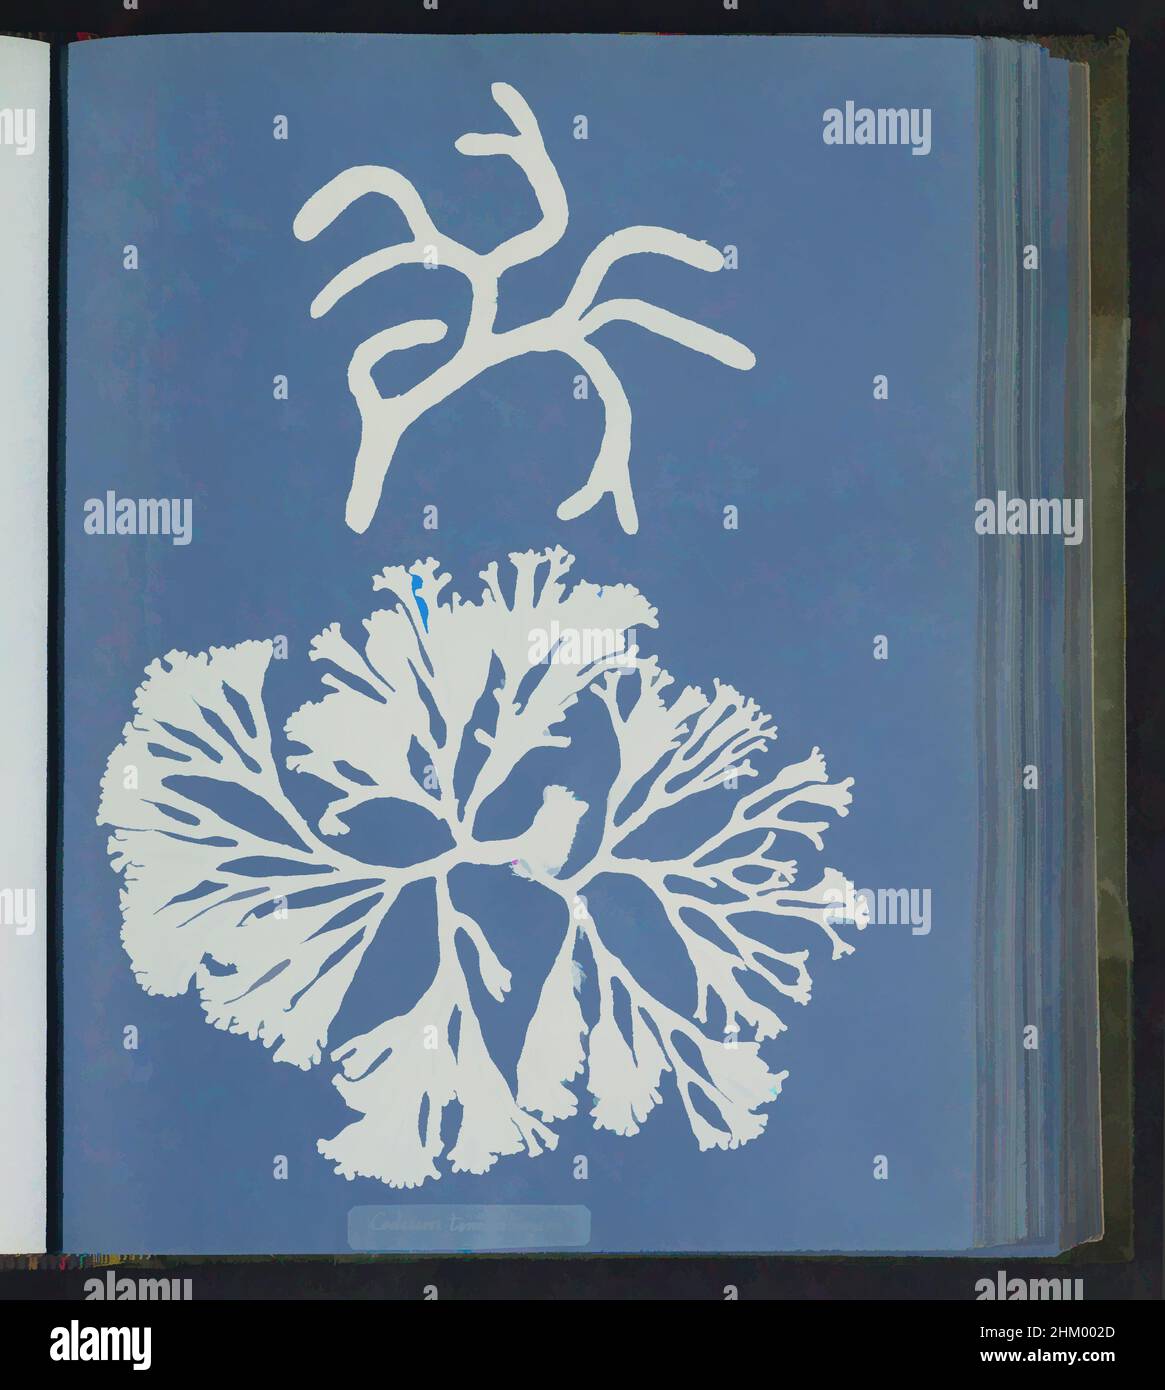 Art inspired by Codium tomentosum, Anna Atkins, United Kingdom, c. 1843 - c. 1853, photographic support, cyanotype, height 250 mm × width 200 mm, Classic works modernized by Artotop with a splash of modernity. Shapes, color and value, eye-catching visual impact on art. Emotions through freedom of artworks in a contemporary way. A timeless message pursuing a wildly creative new direction. Artists turning to the digital medium and creating the Artotop NFT Stock Photo